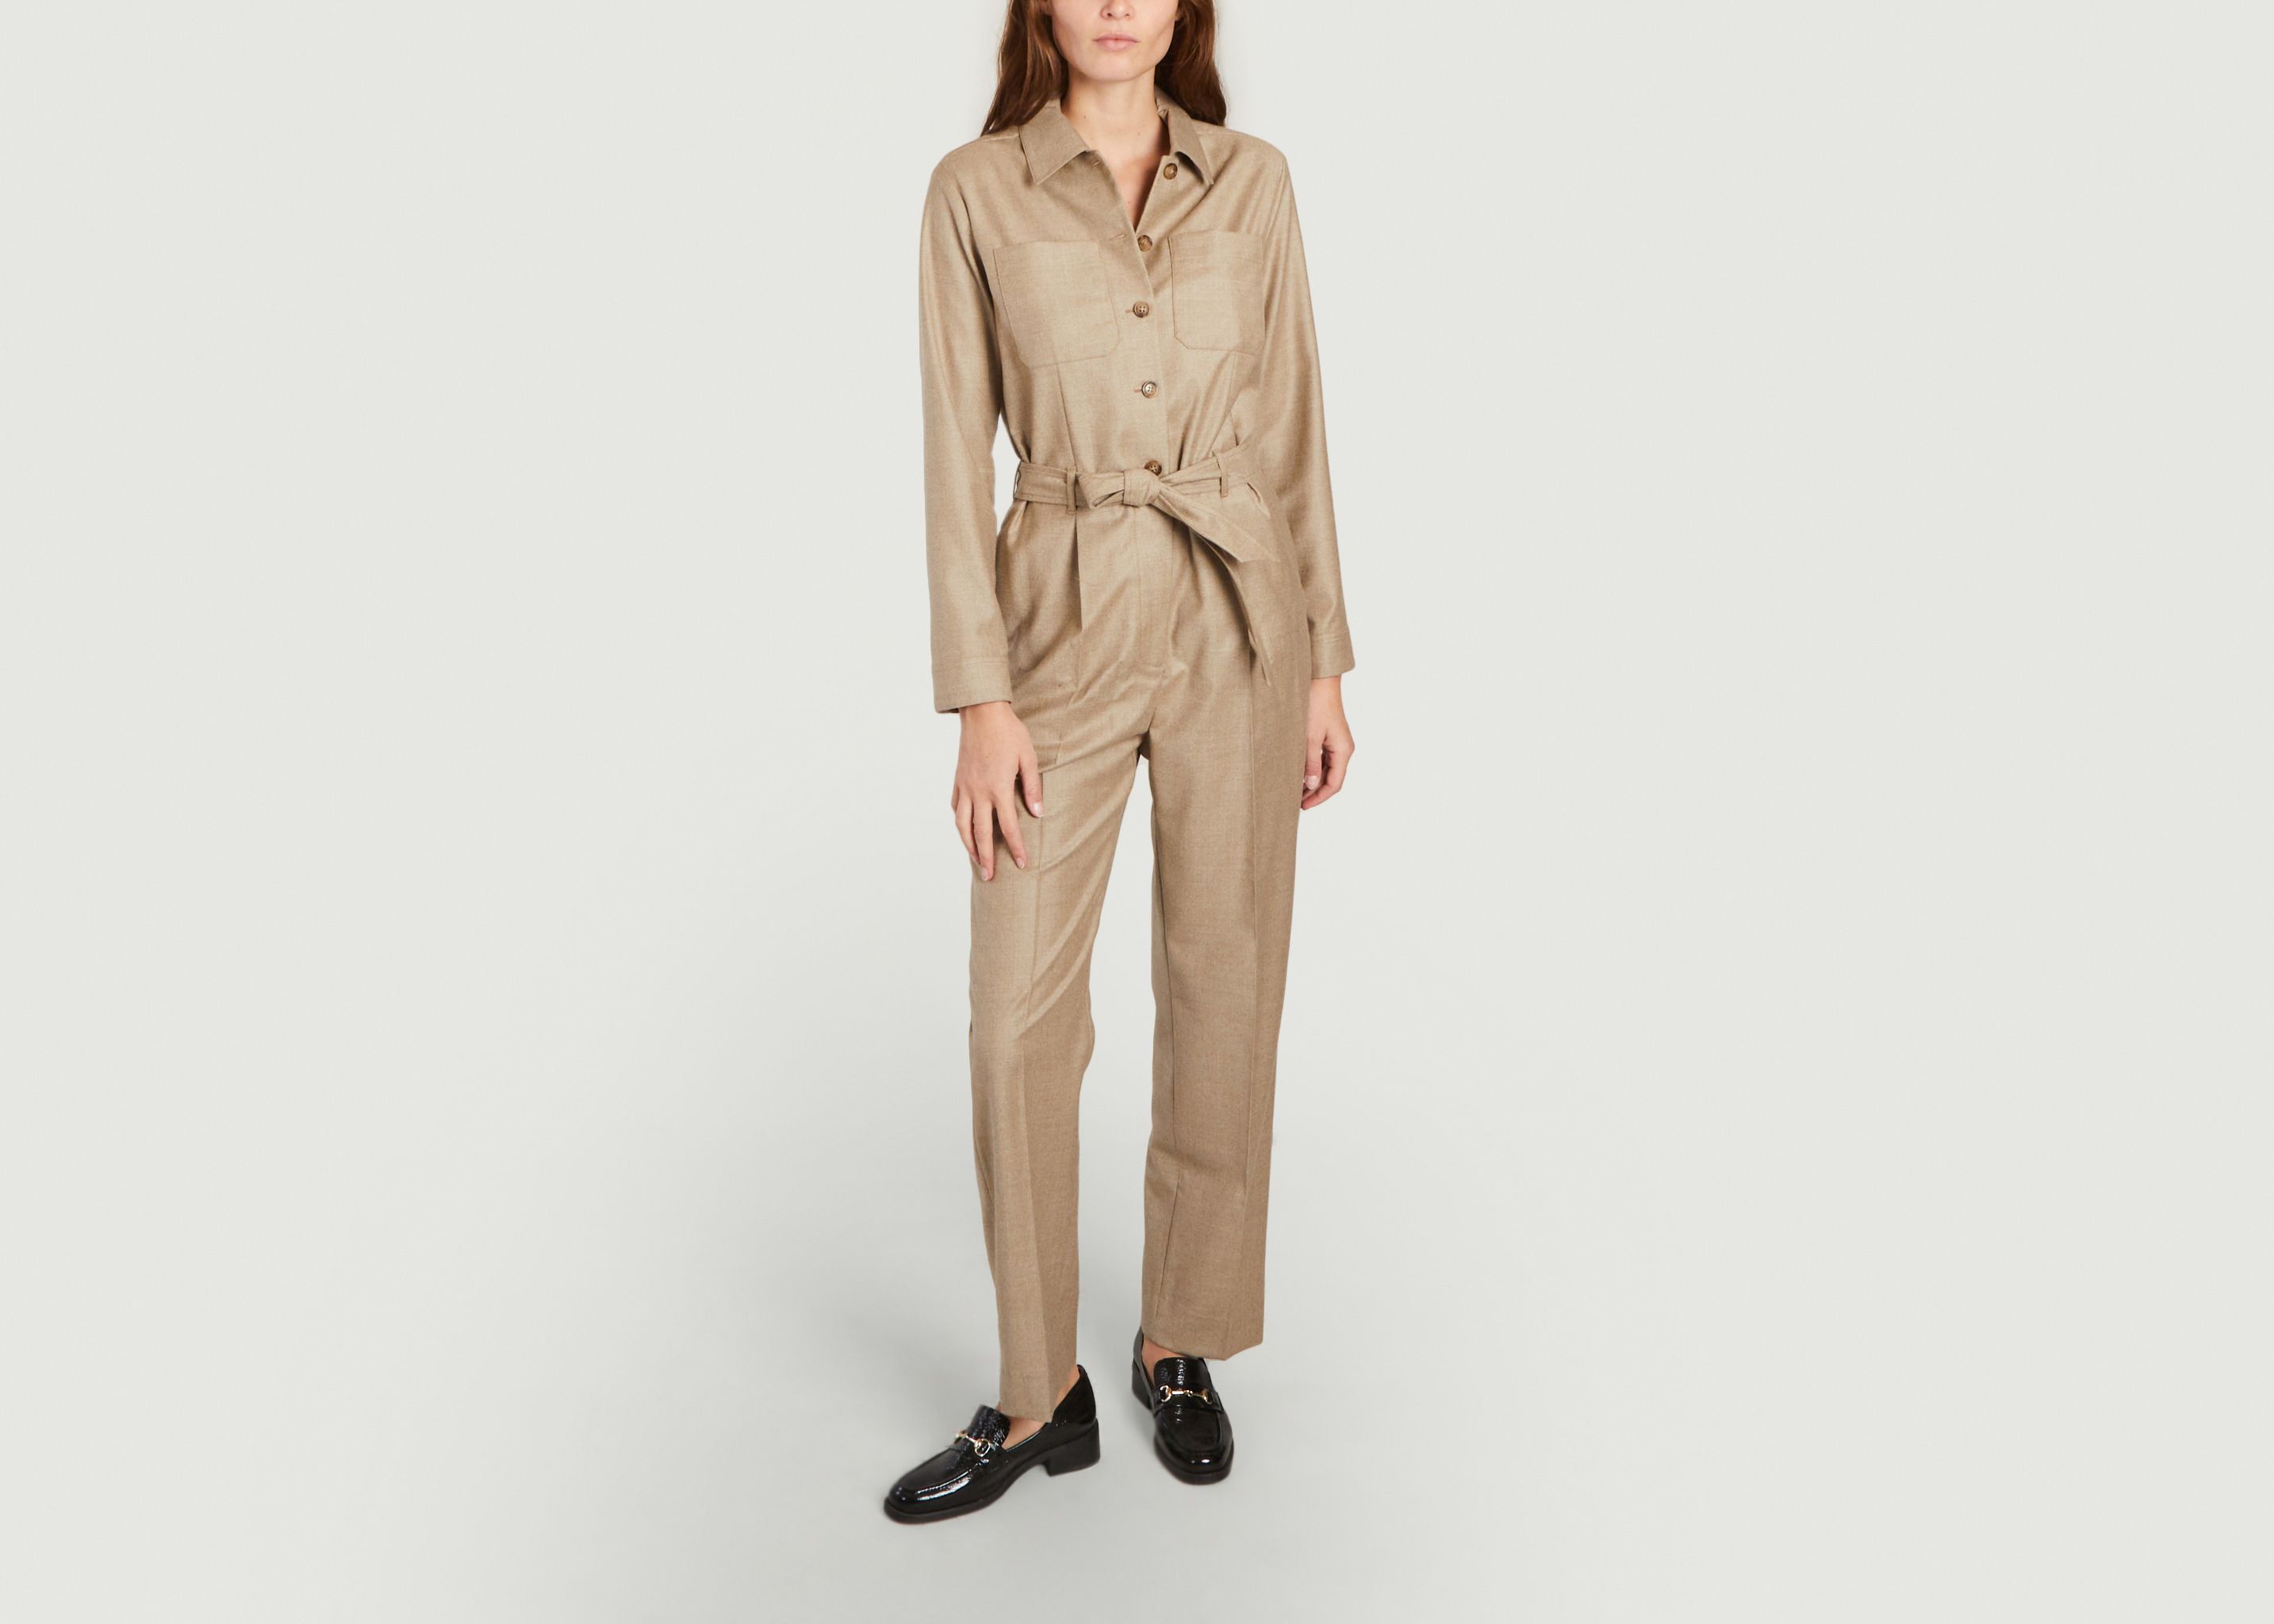 Clem Overall aus Wolle.  - A.P.C.